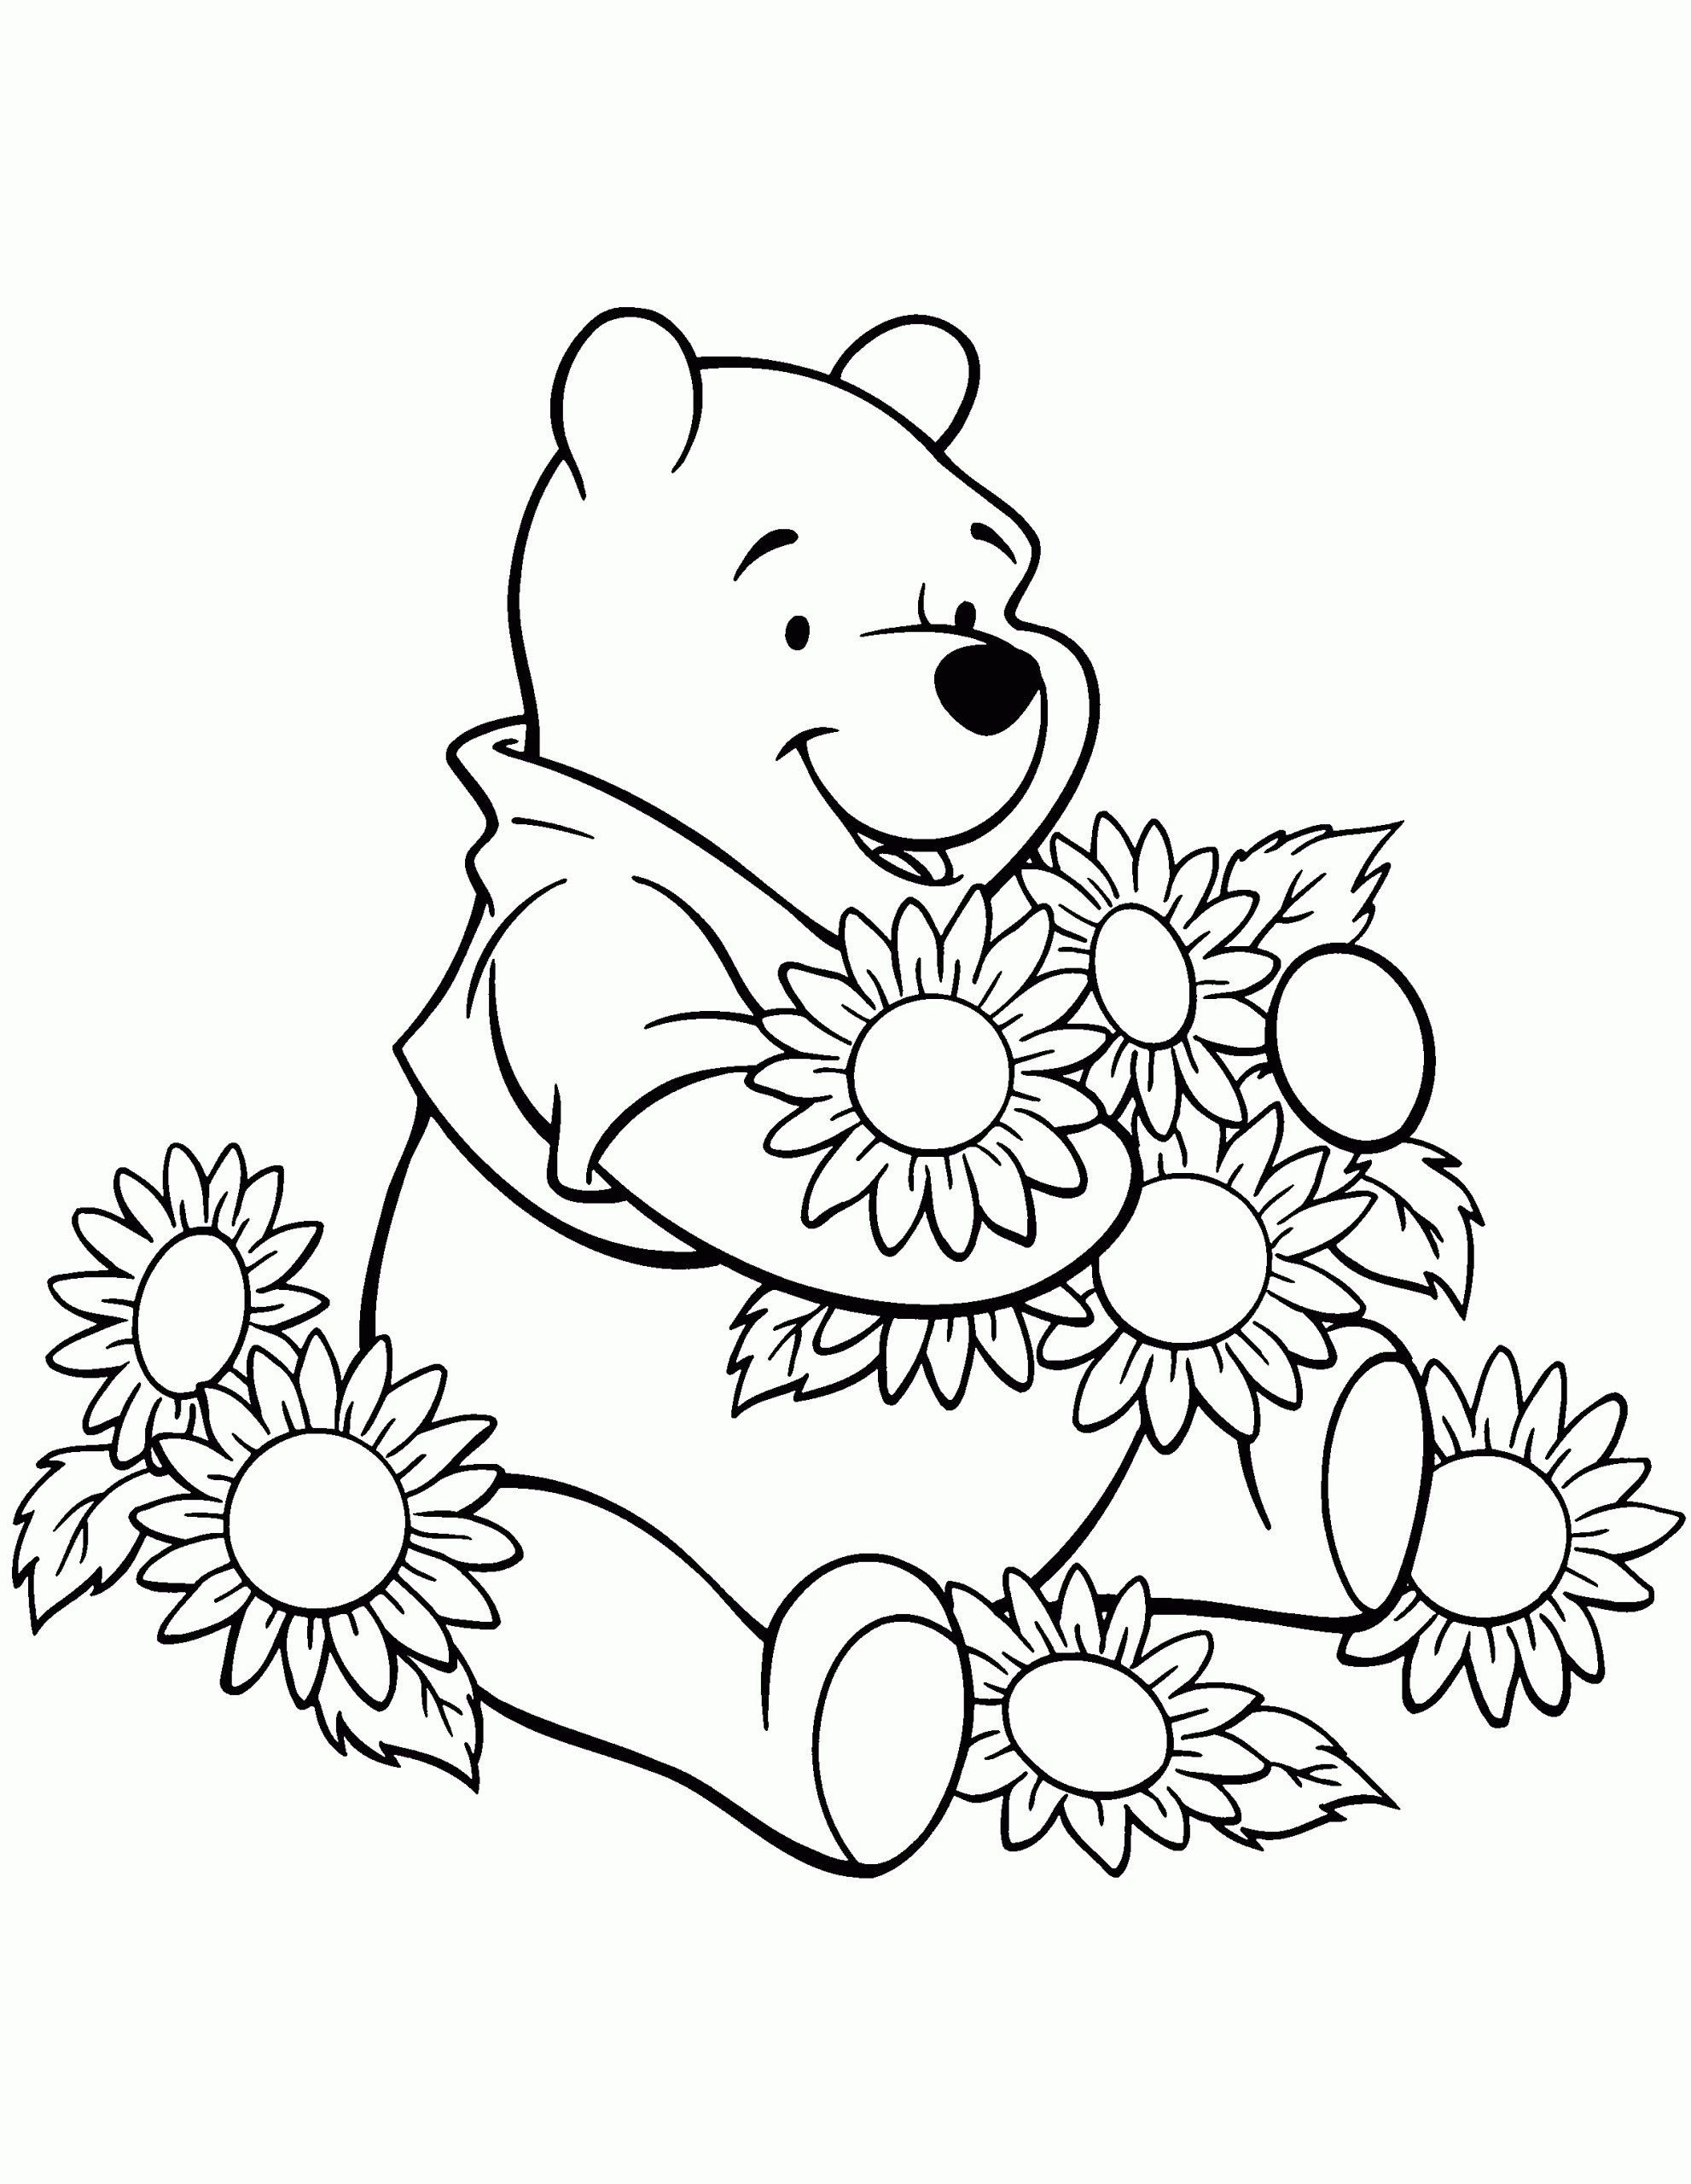 Baby Winnie The Pooh Hold SunFlower Coloring Page